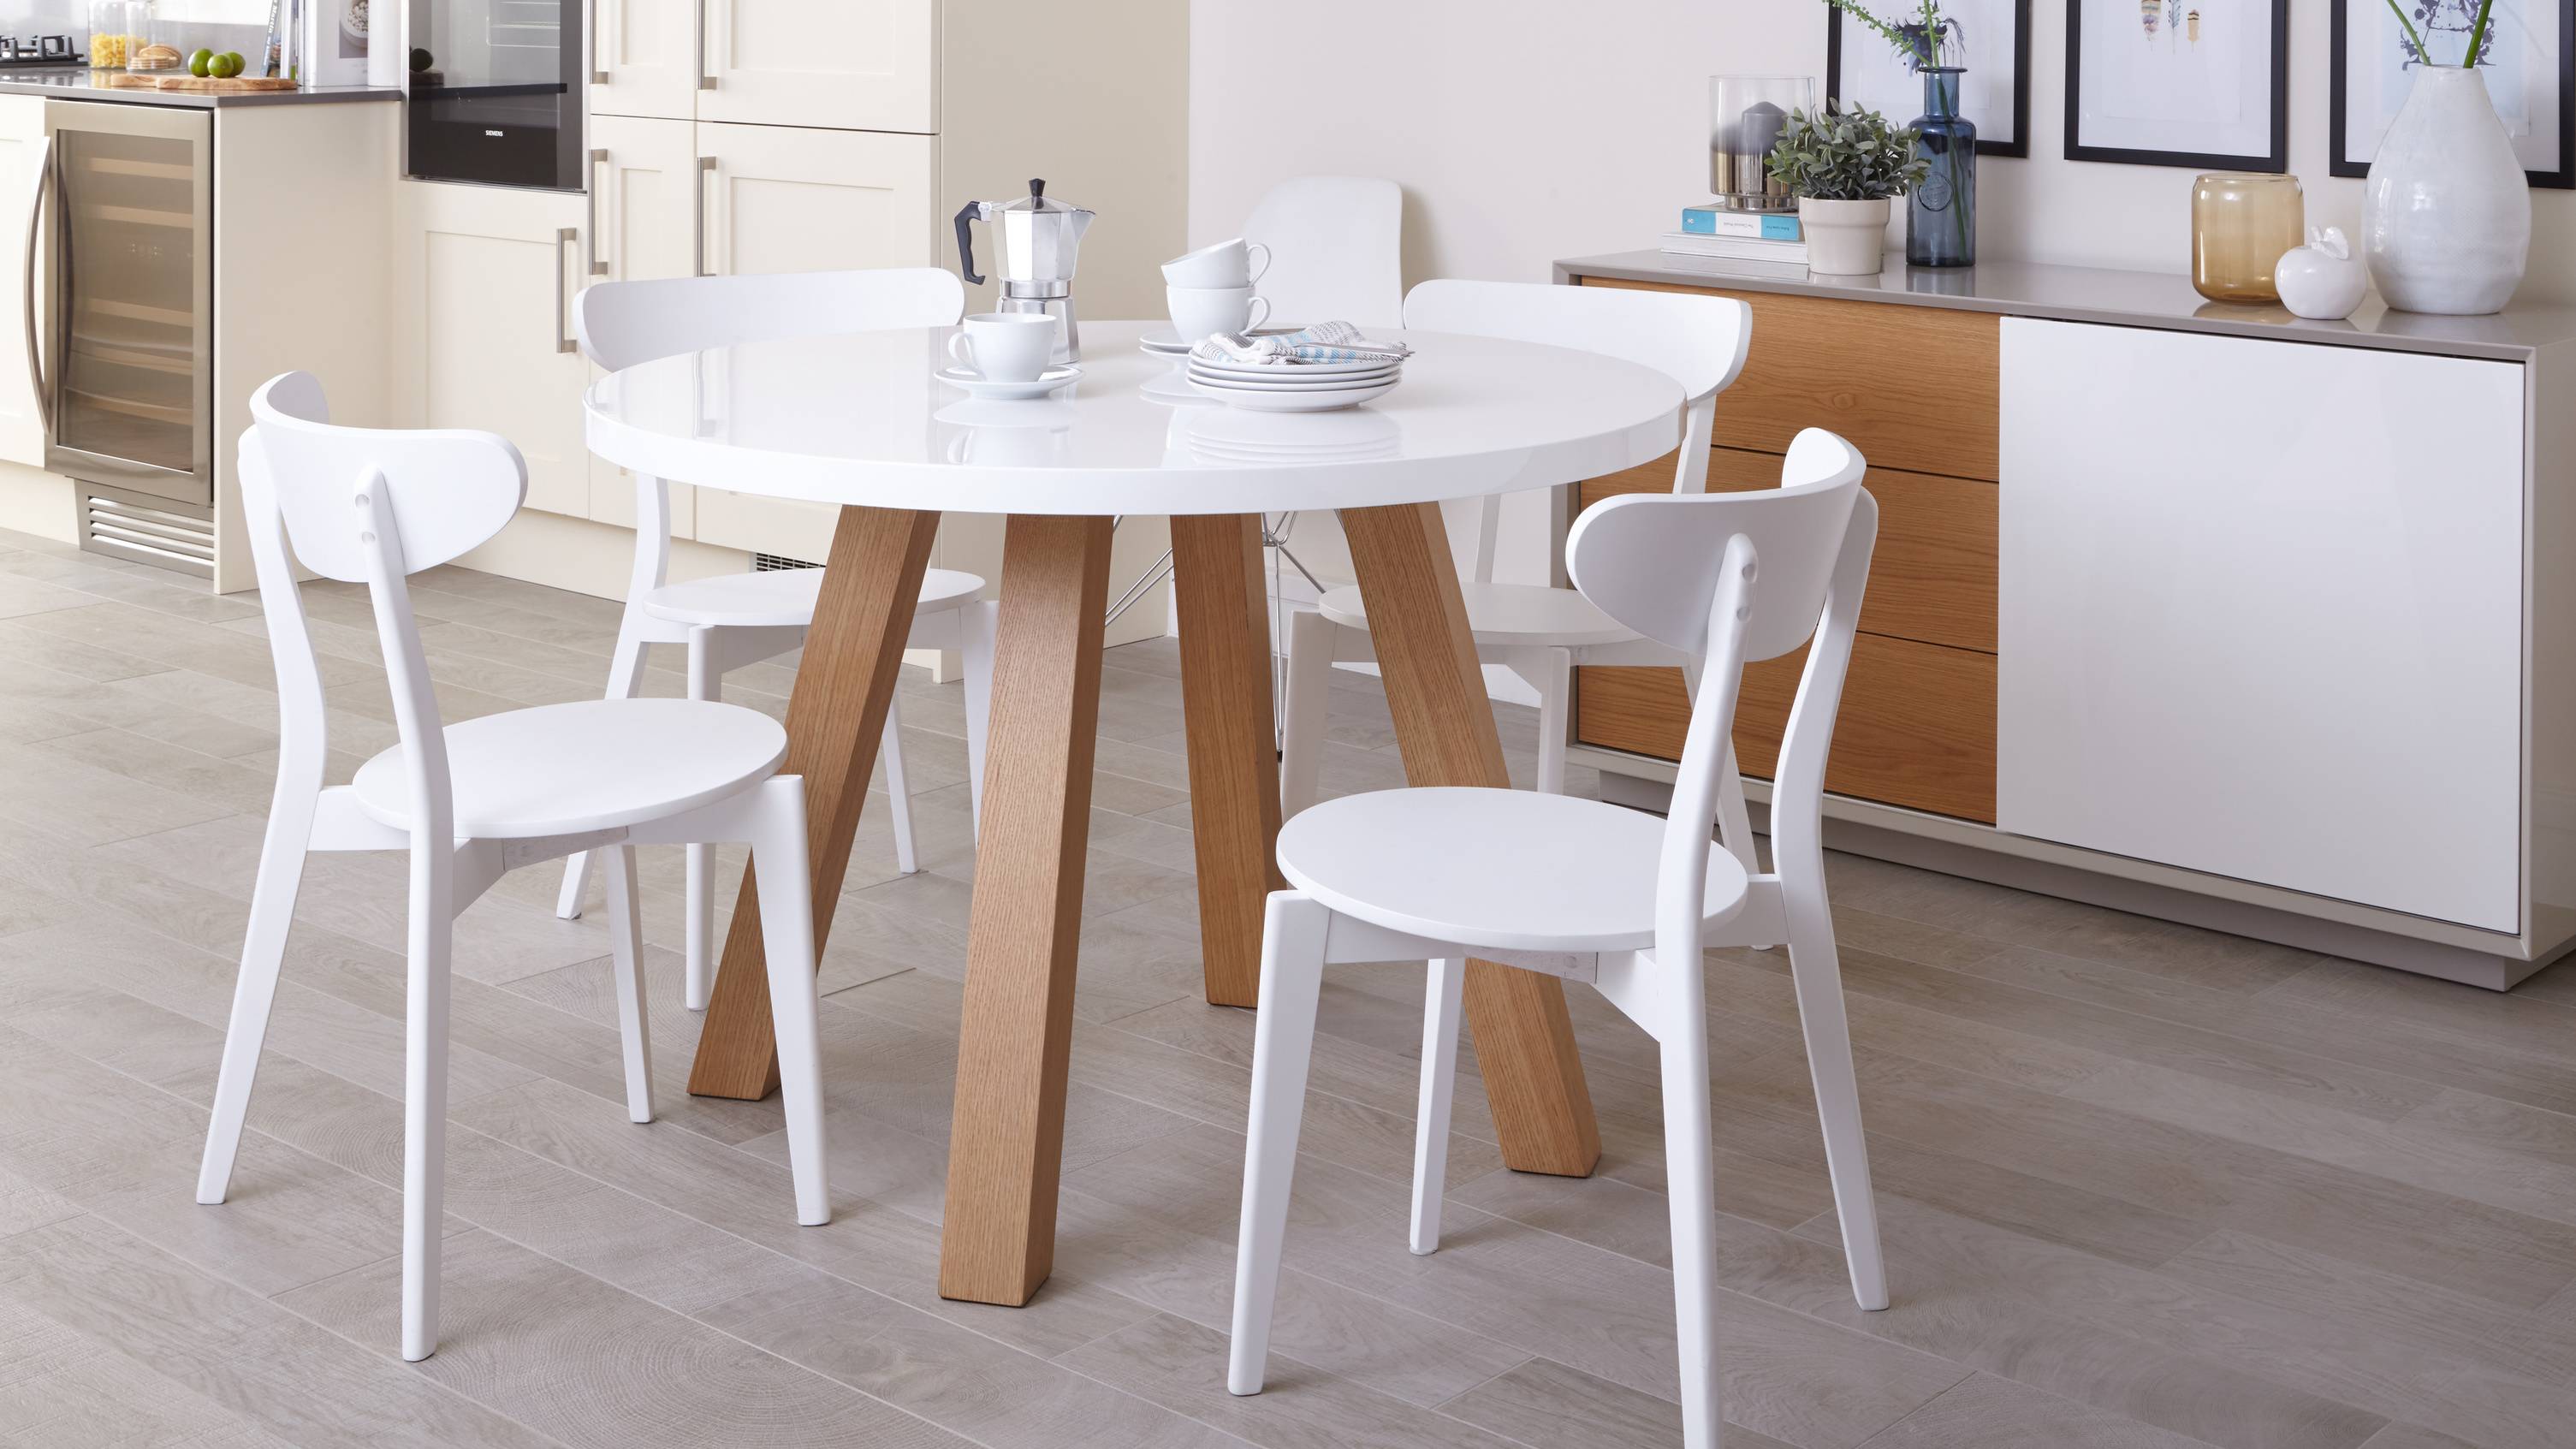 Classic White and Wood Dining Set